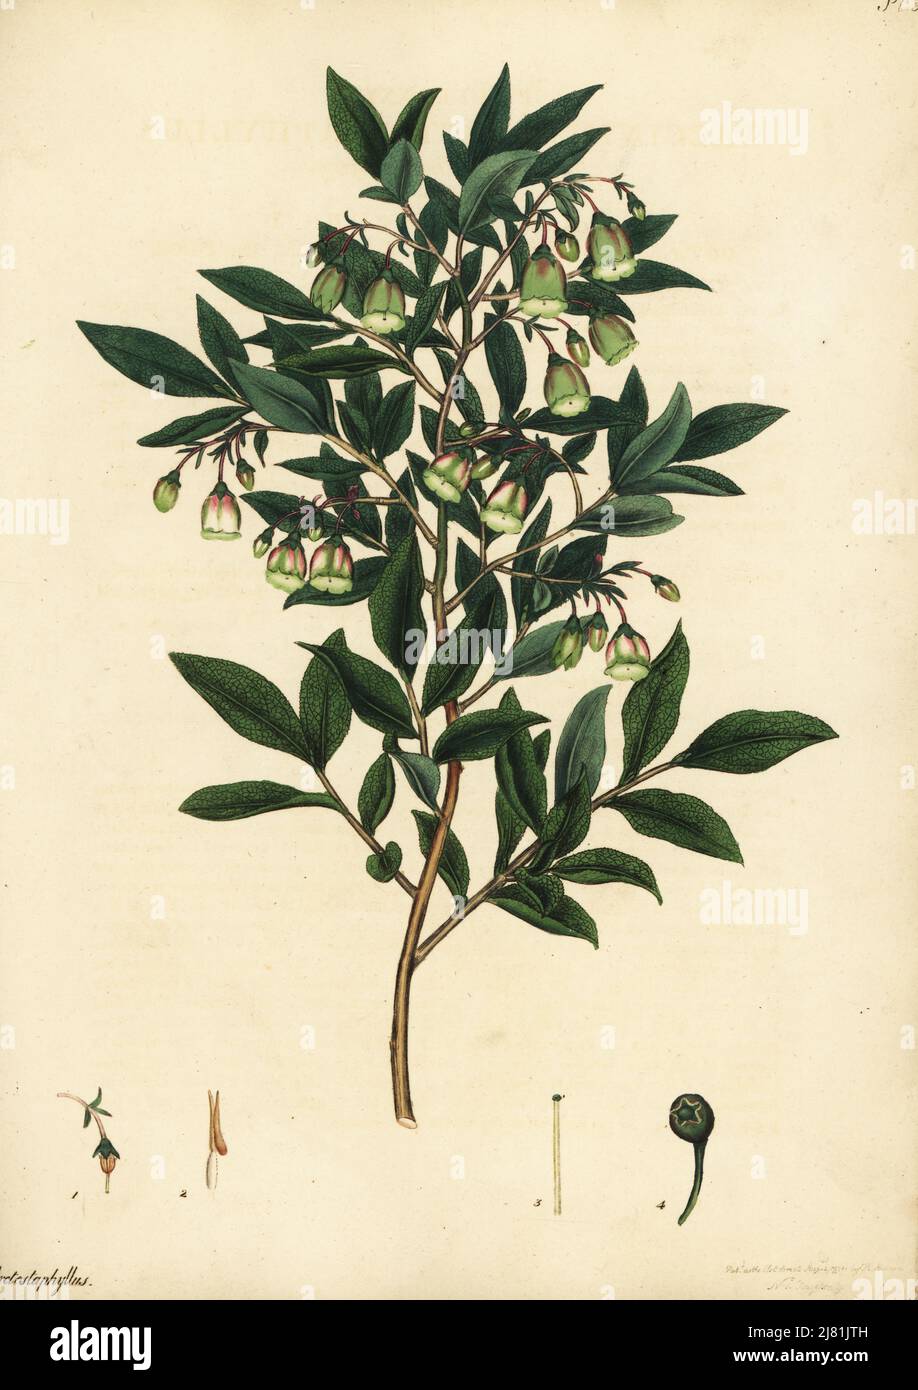 Caucasian whortleberry, Vaccinium arctostaphylos. Madeira whortleberry, Vaccinum arctostaphyllus. Copperplate engraving drawn, engraved and hand-coloured by Henry Andrews from his Botanical Register, Volume 1, published in London, 1799. Stock Photo